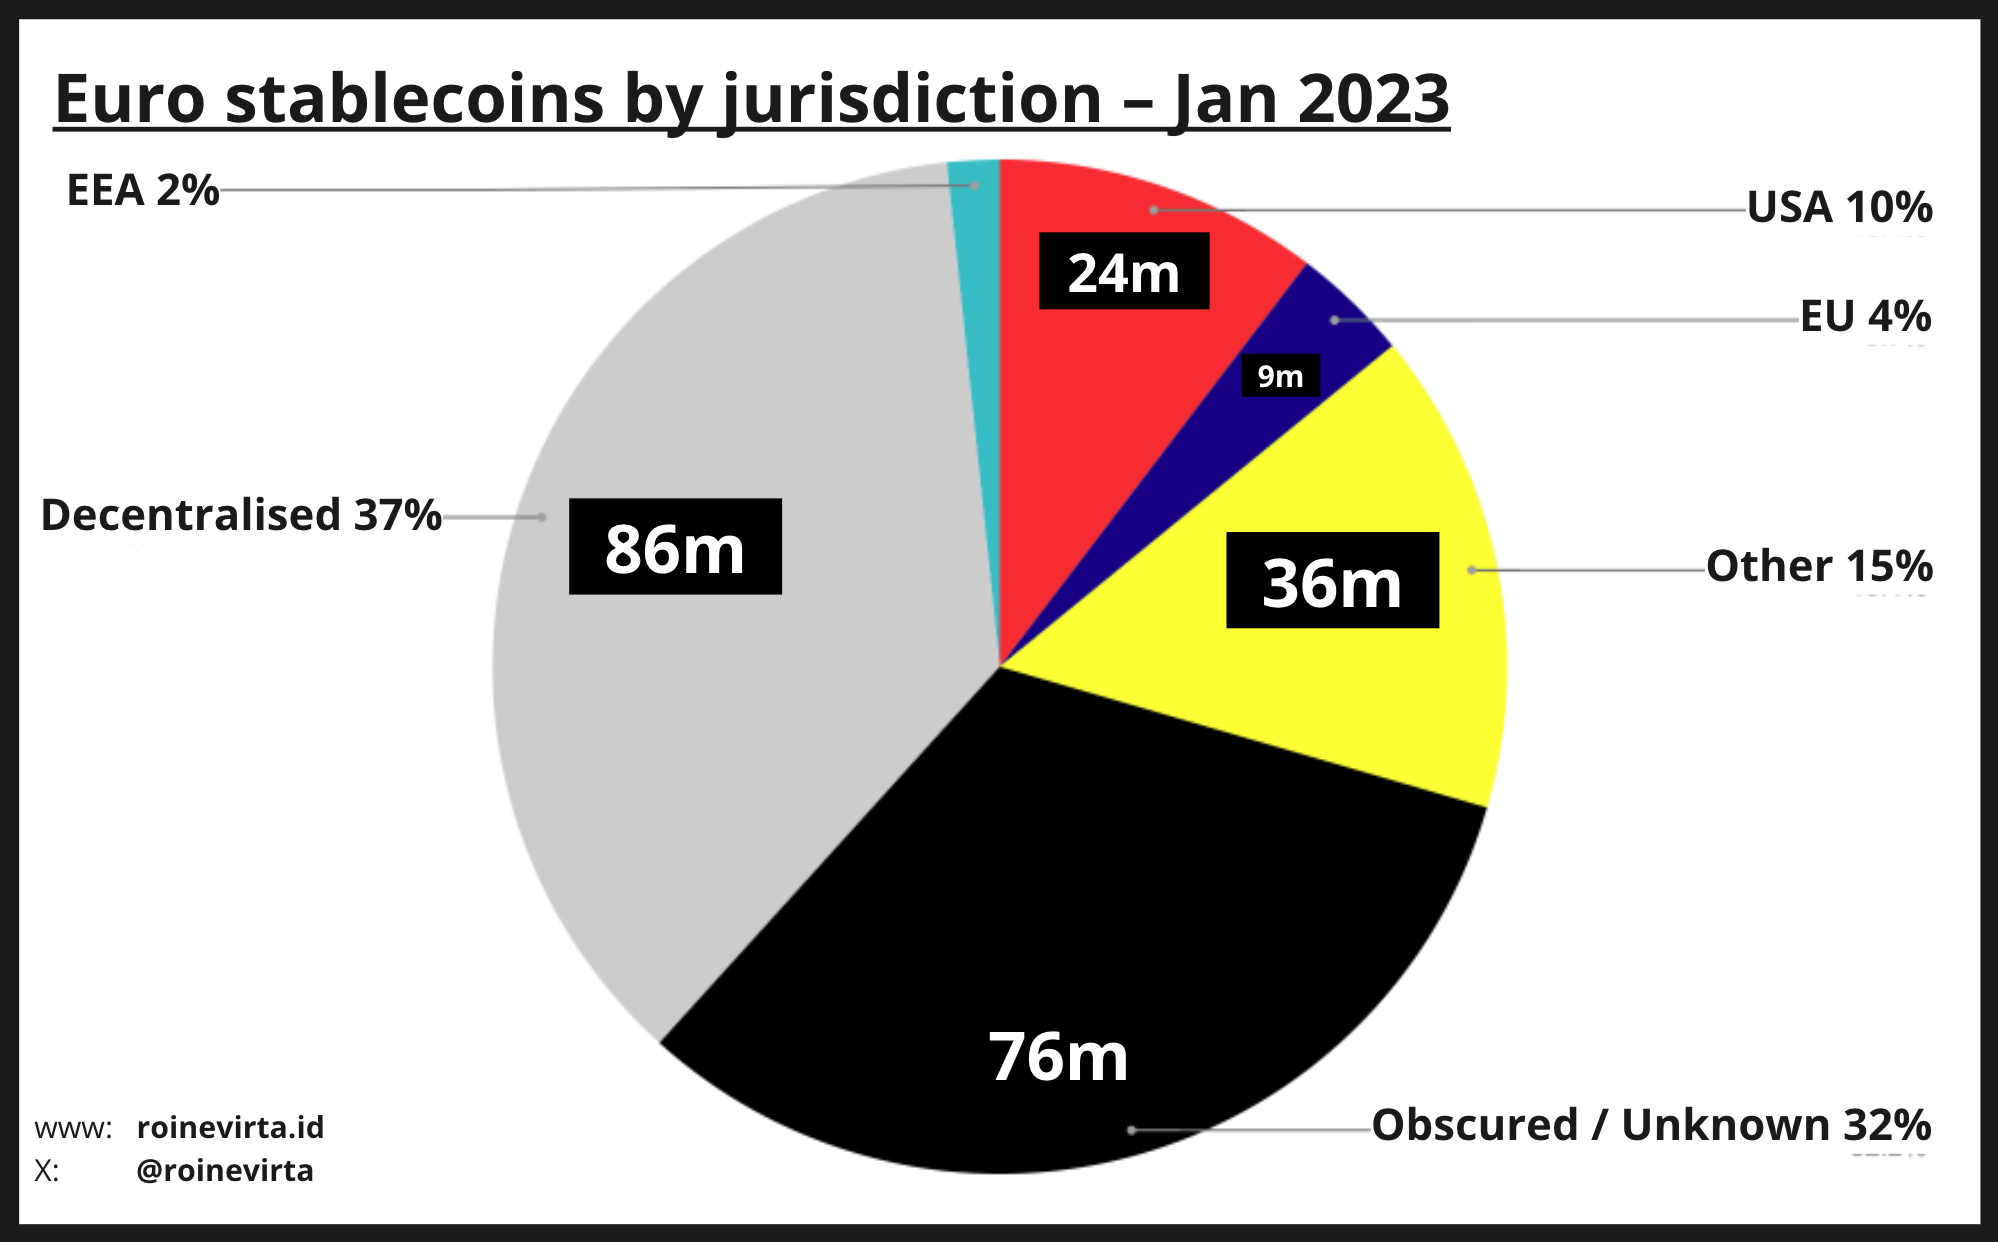 Figure 7: Euro stablecoins by jurisdiction in January